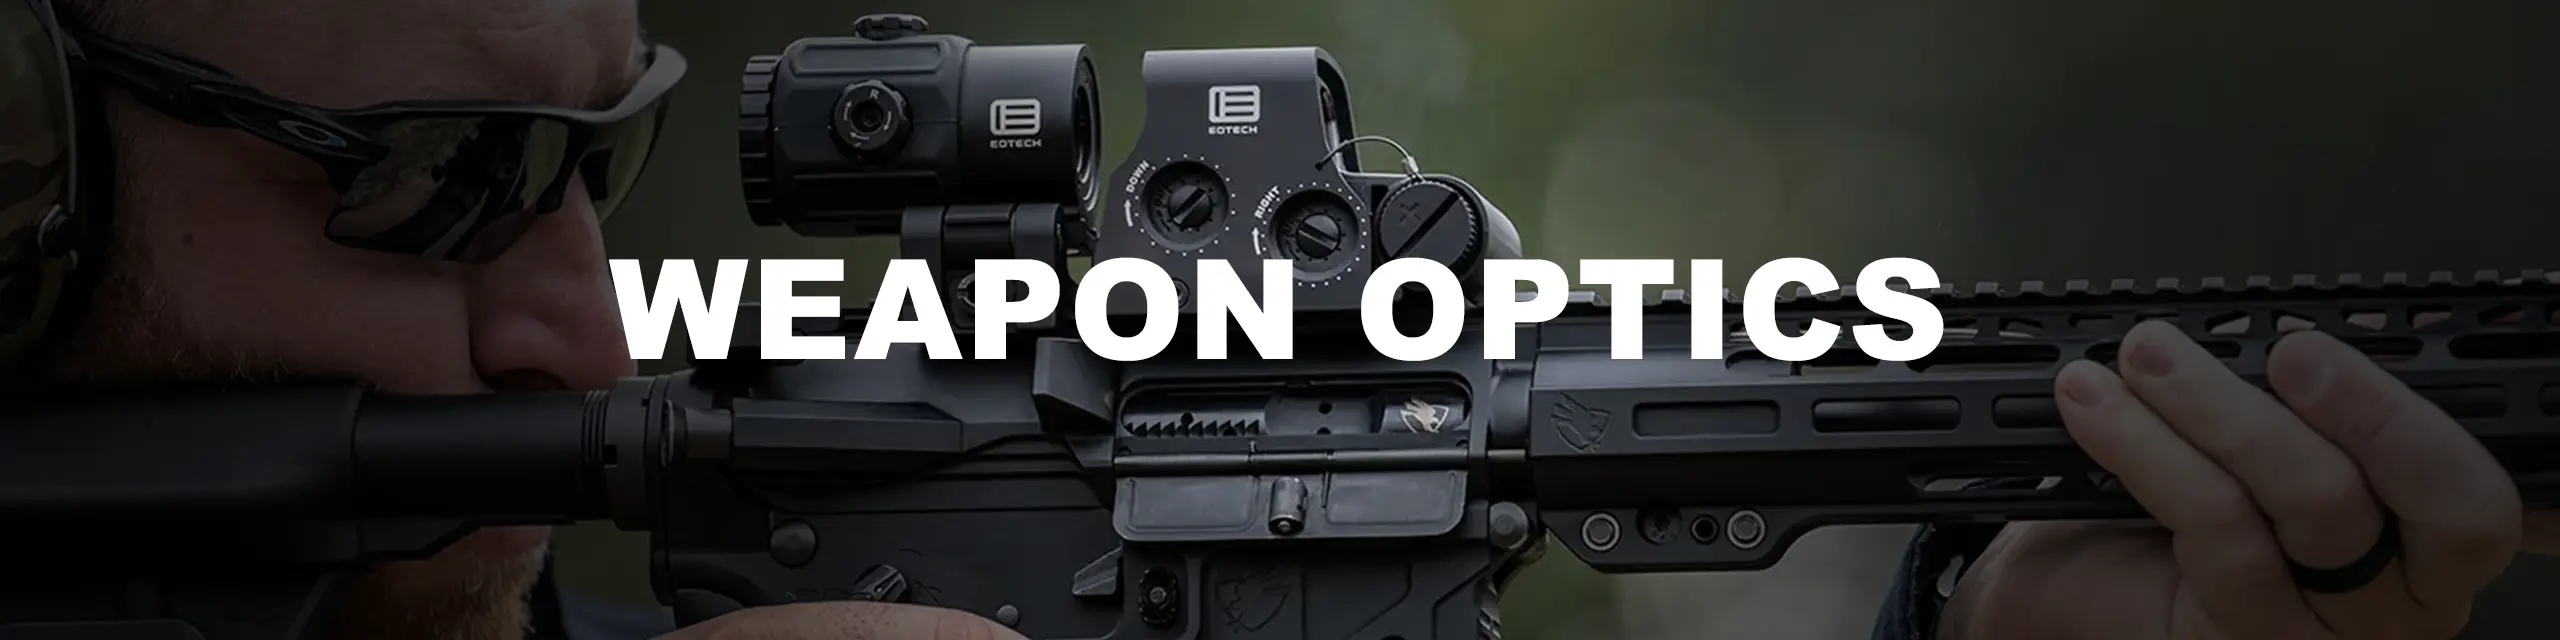 Weapon Optics offered by East Texas Gunner